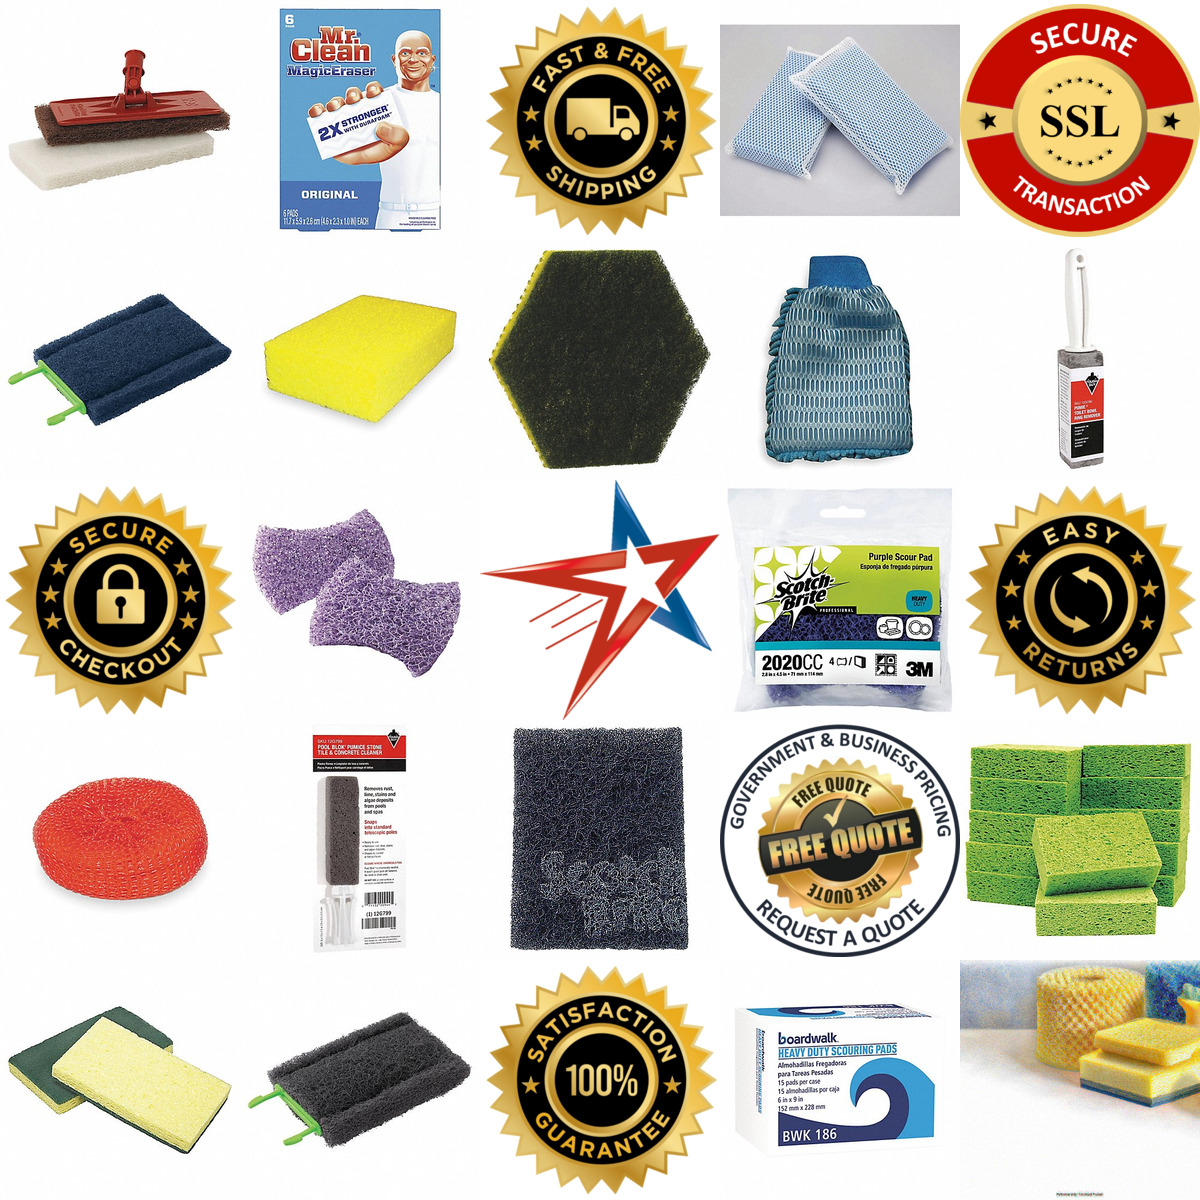 A selection of Sponges and Scouring Pads products on GoVets